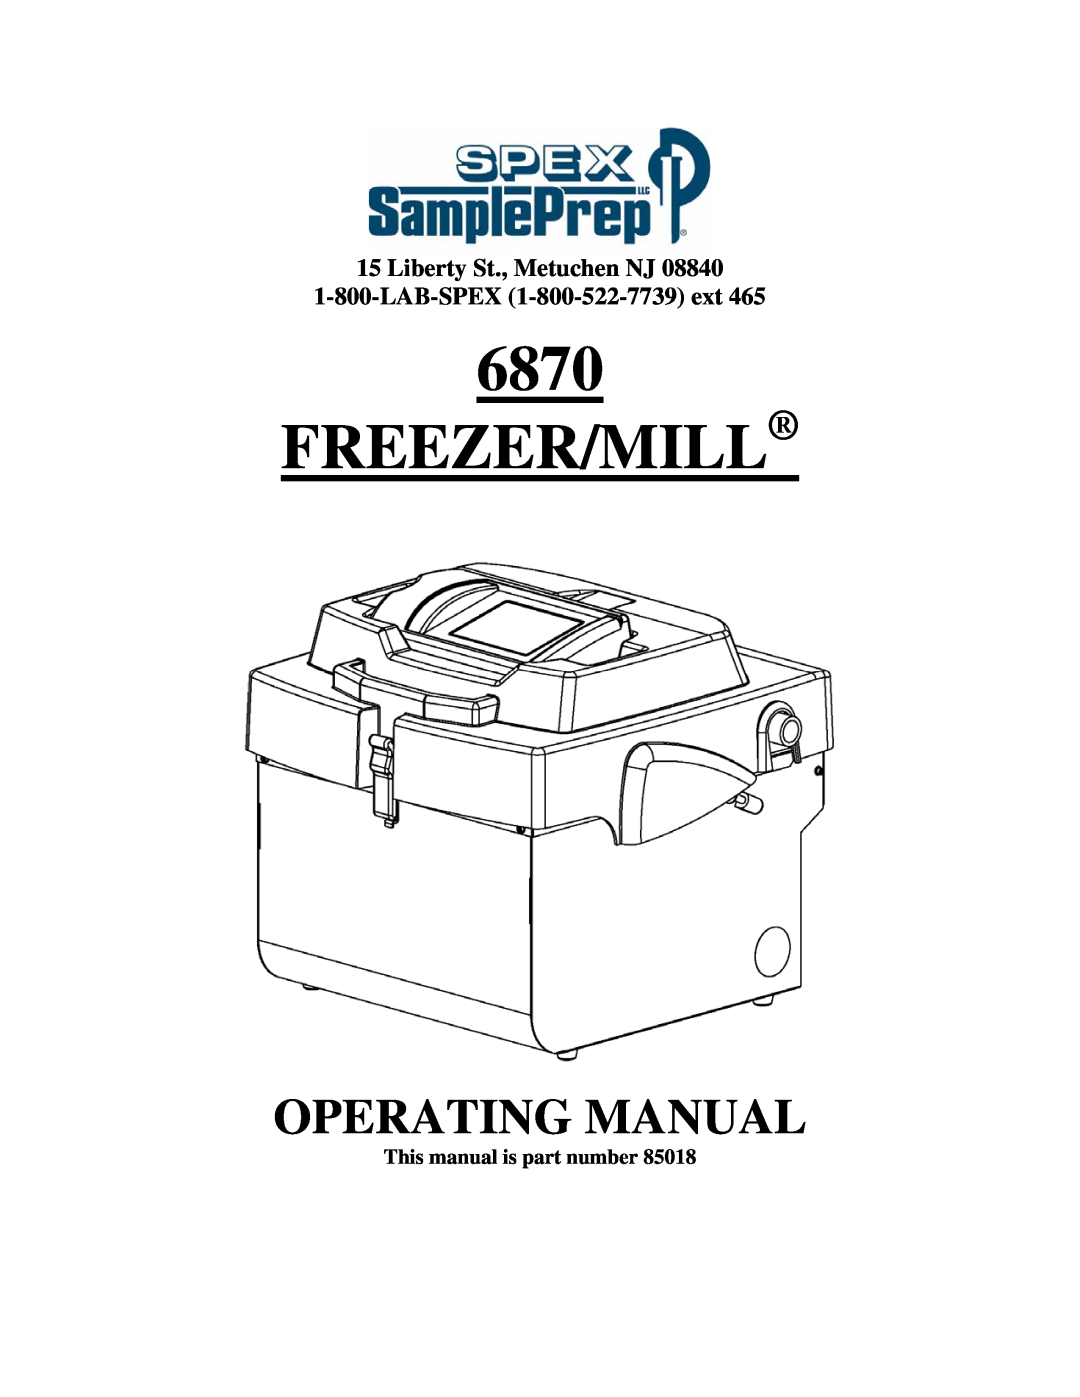 Allied Telesis 6870 manual Liberty St., Metuchen NJ, LAB-SPEX 1-800-522-7739ext, This manual is part number, Freezer/Mill 